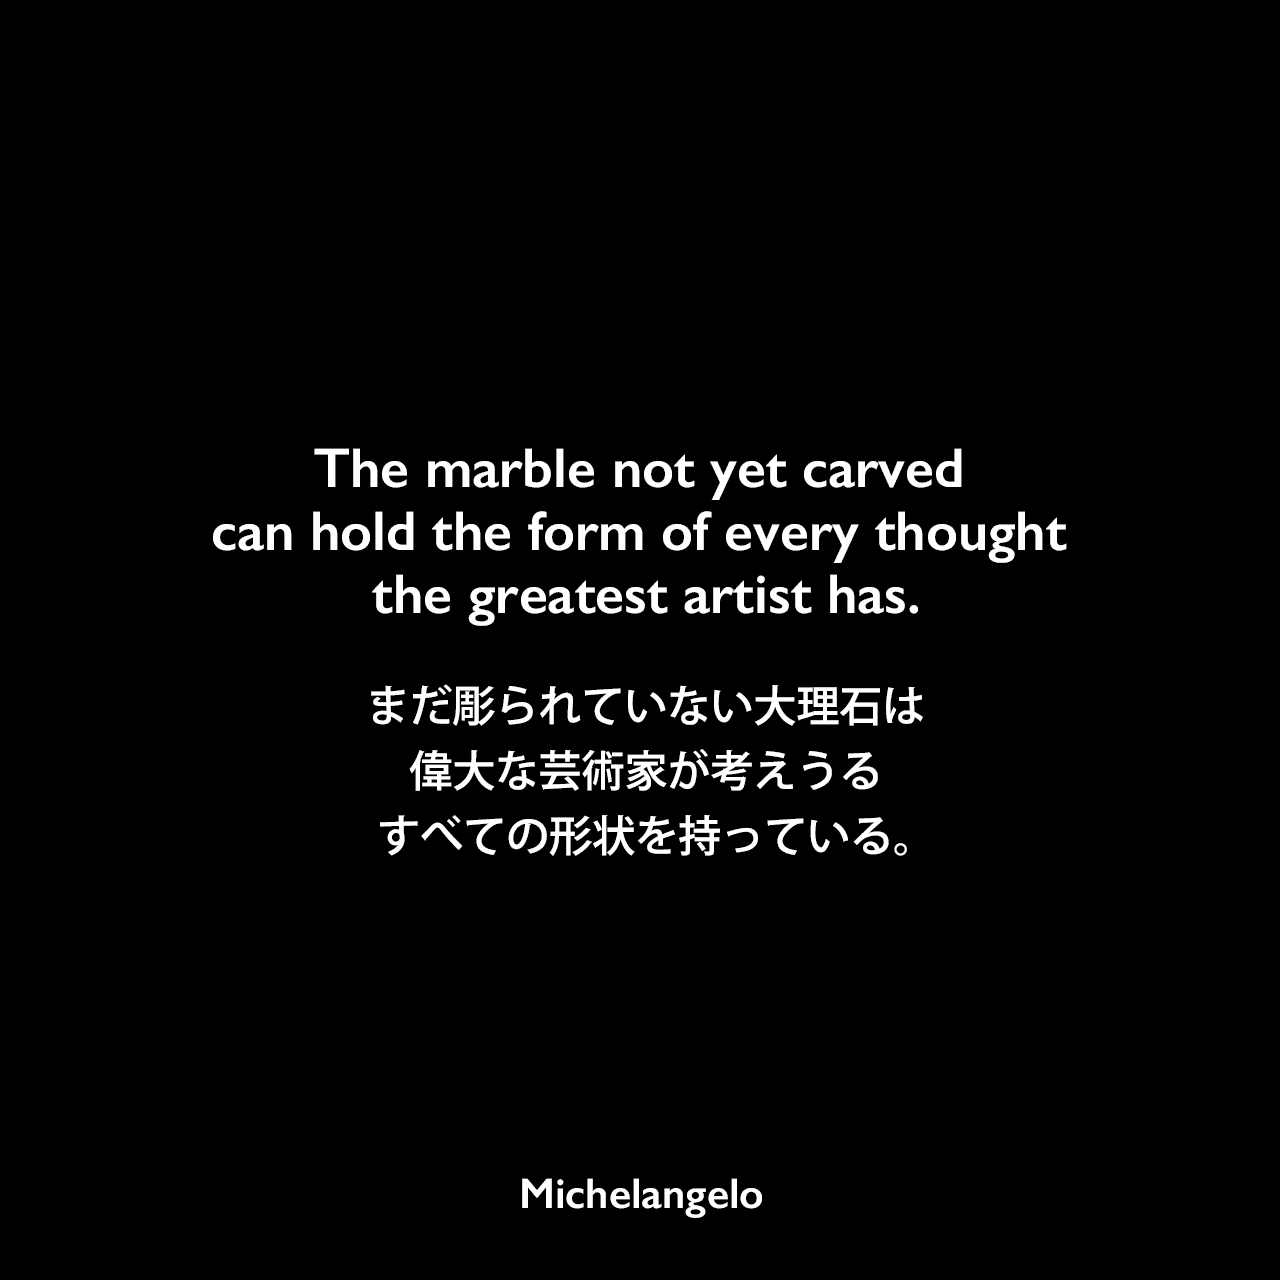 The marble not yet carved can hold the form of every thought the greatest artist has.まだ彫られていない大理石は、偉大な芸術家が考えうるすべての形状を持っている。Michelangelo